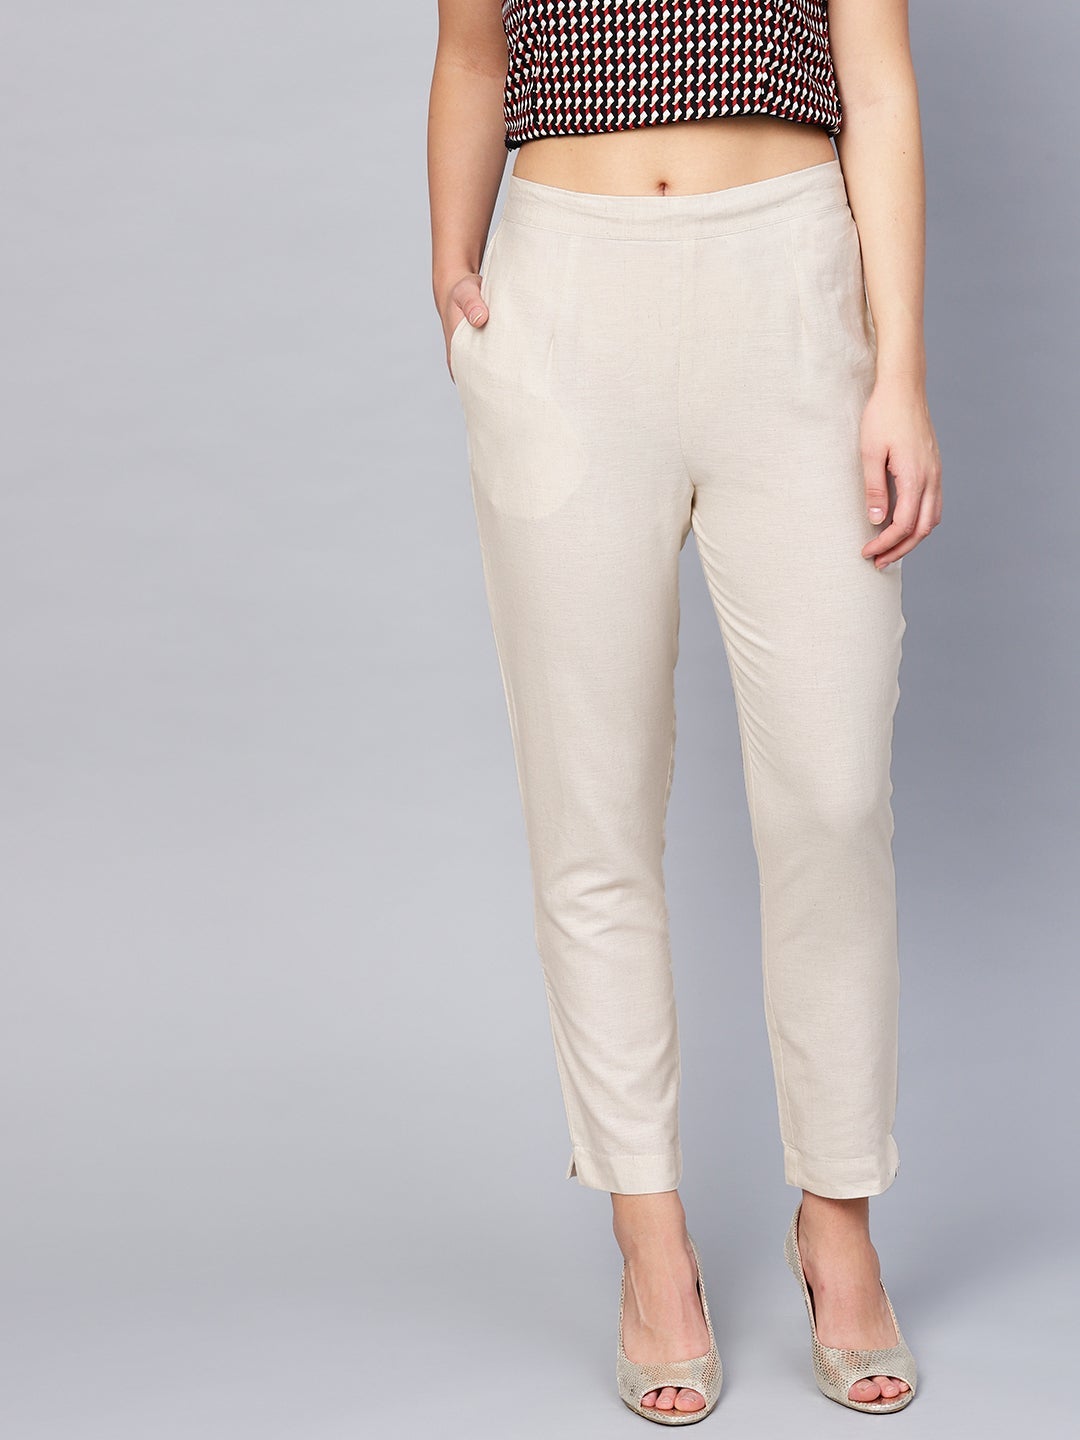 Juniper Off-White Solid Cotton Flex Slim Fit Women Pants With Two Pockets